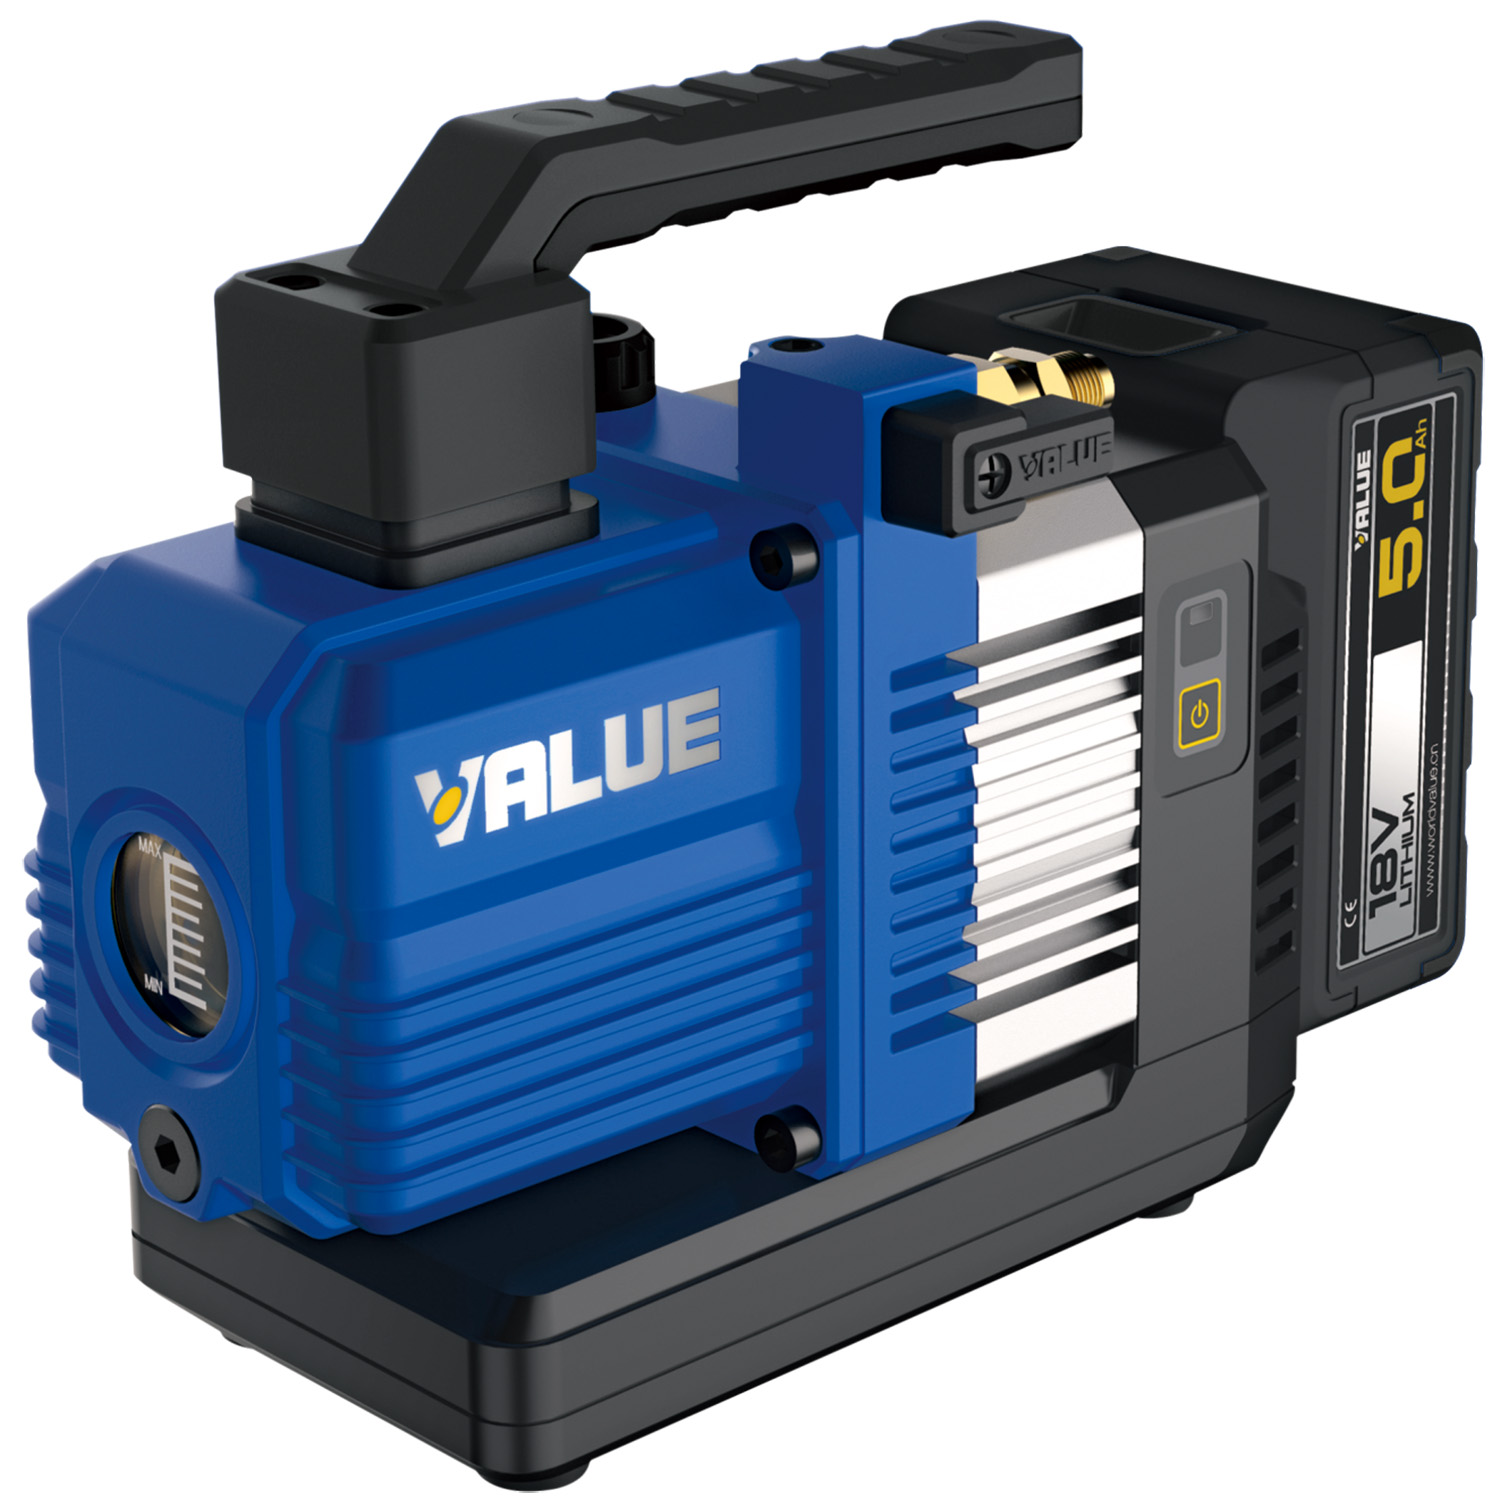 Vacuum pump VRP-2DLi - two stages, battery operated, flow rate 57 liters/minute, also suitable for R32 and A2L refrigerants (2 batteries included)